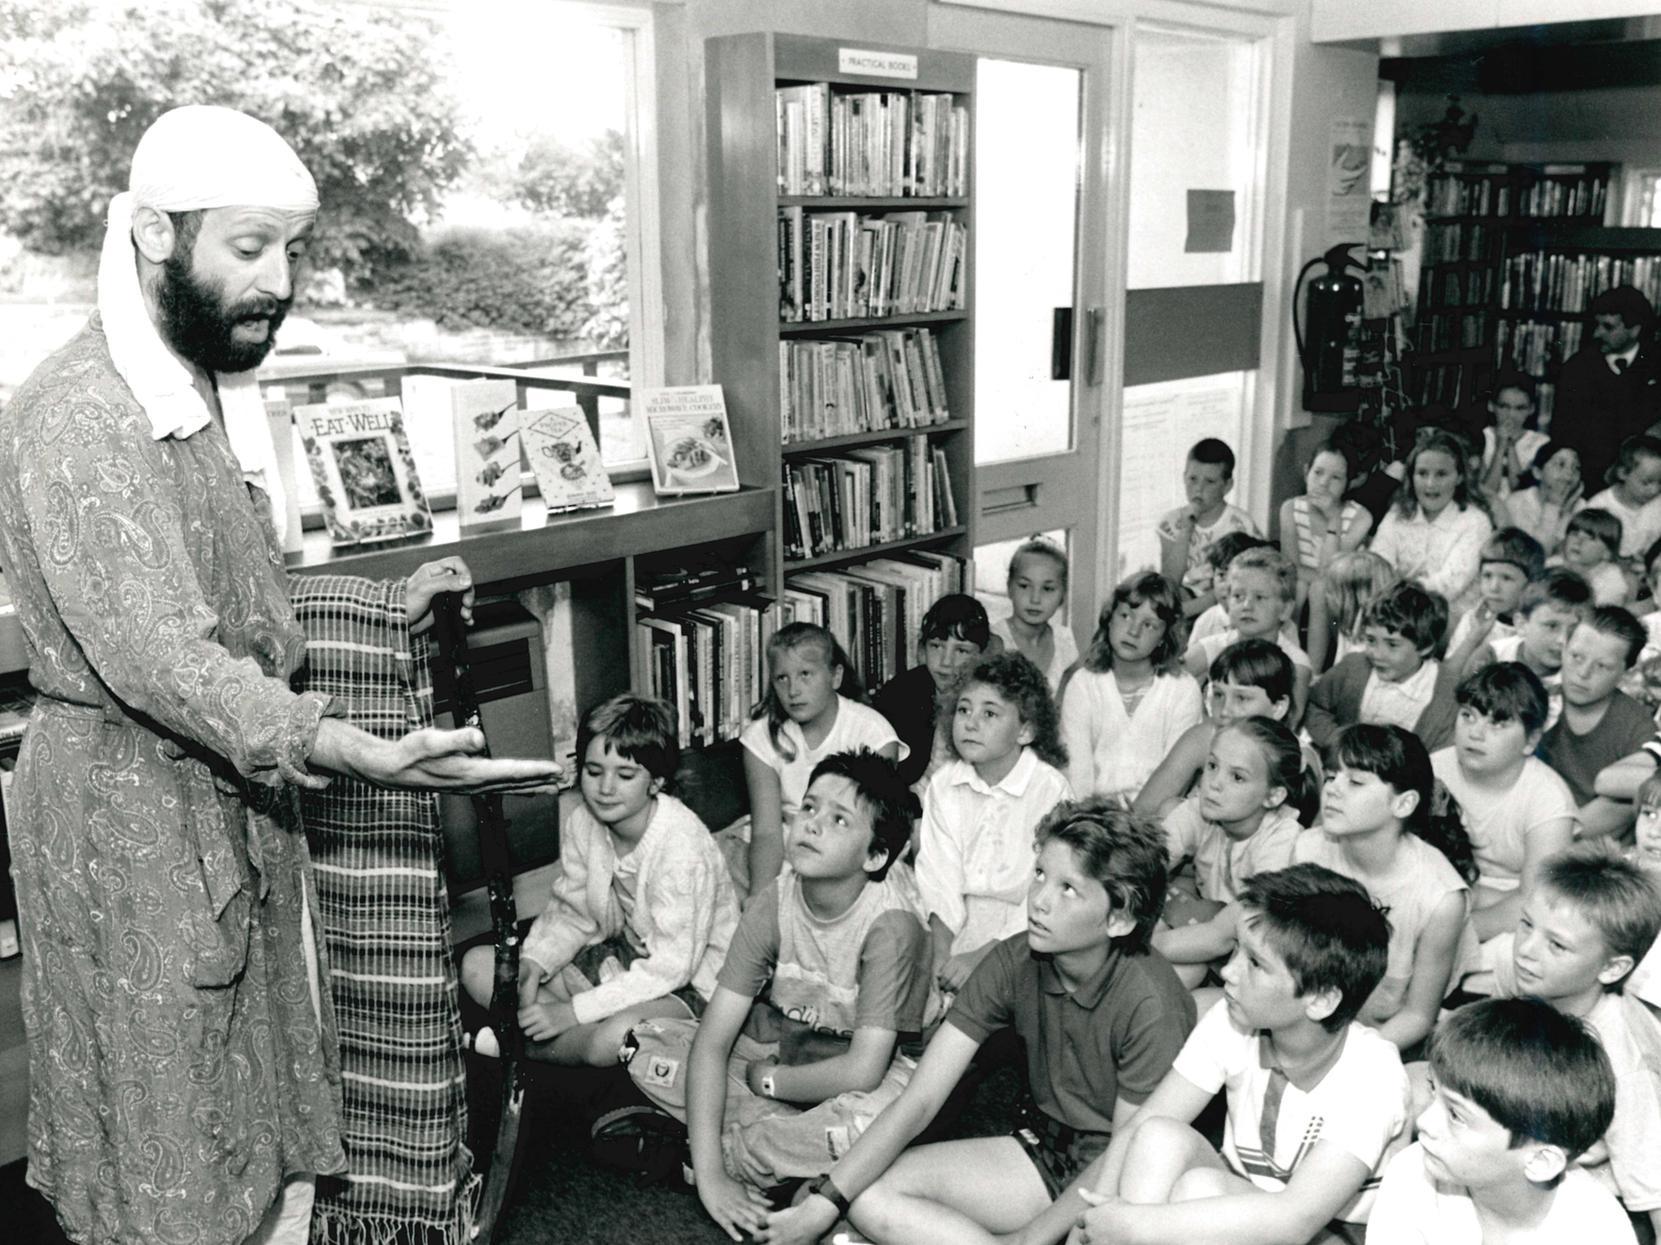 Walton Library holds a special storytime with a school class (Walton Junior School?), date unknown.